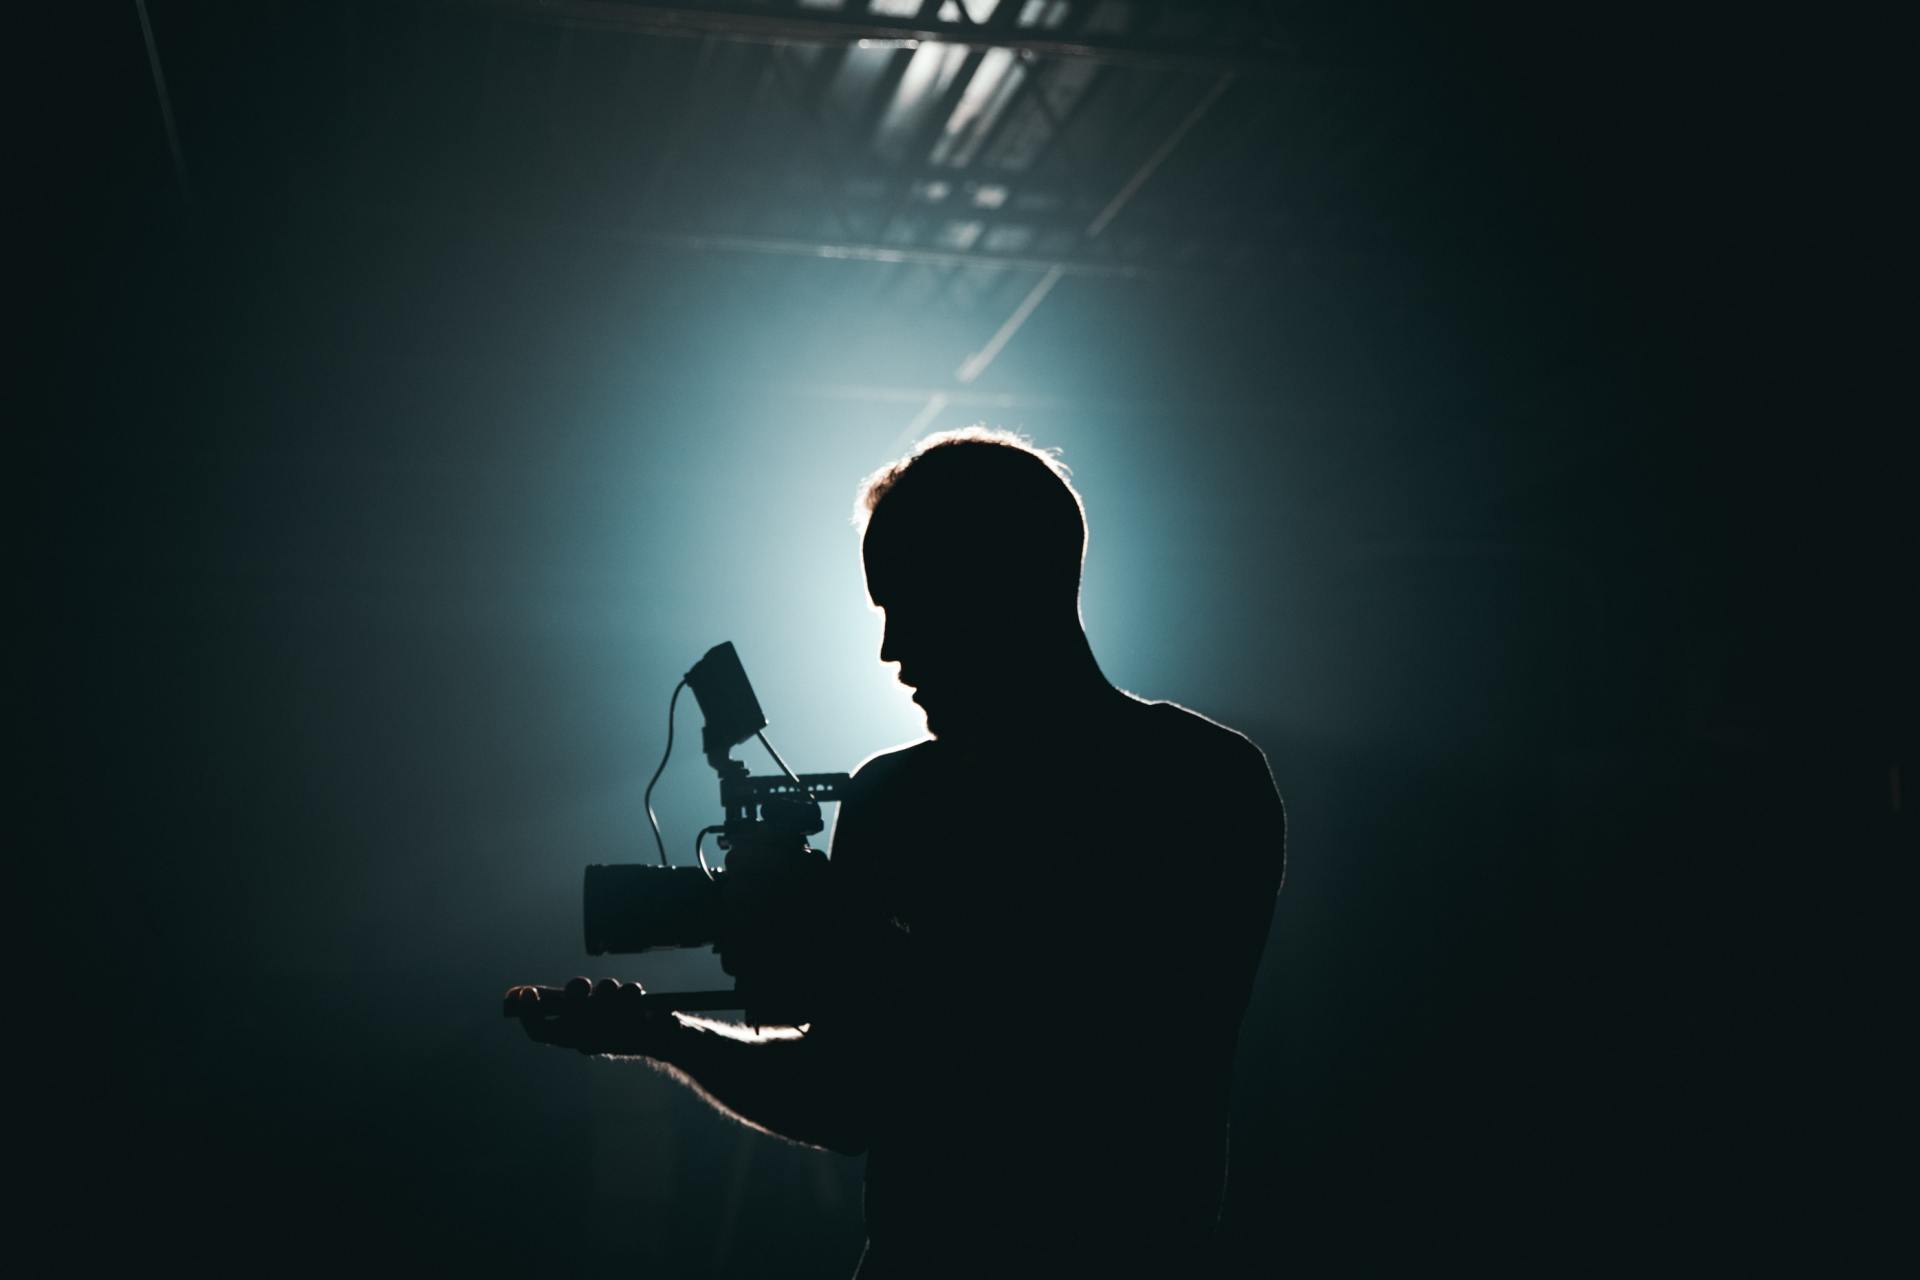 Silhouette of a man hand holding a cinema video camera backlit by a strong light source